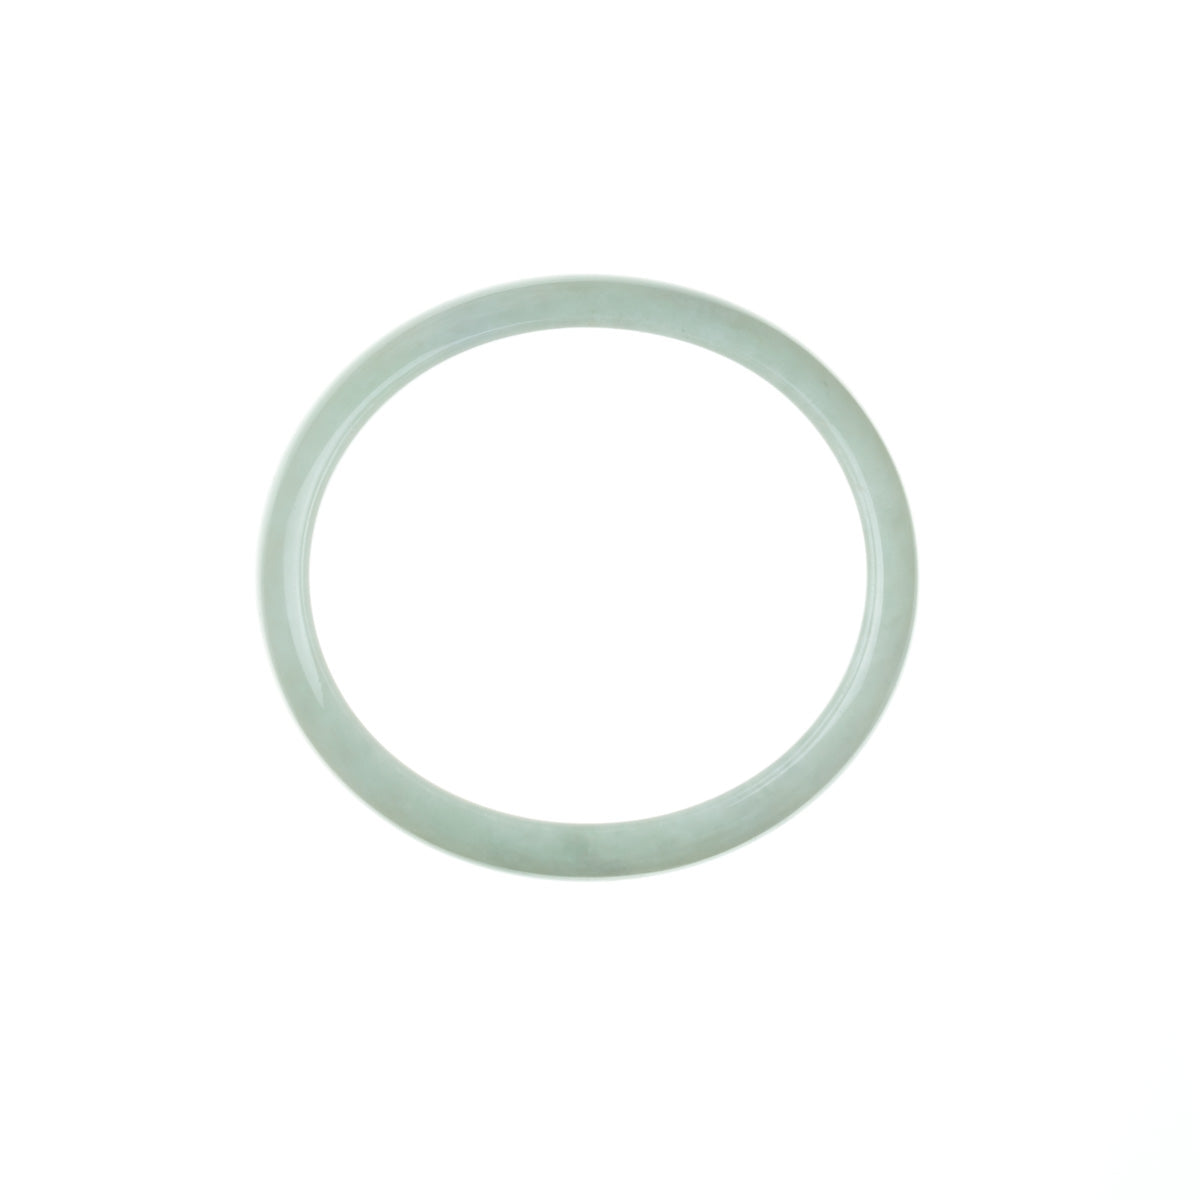 Certified Natural Very plae green Jadeite Bangle - 56mm Oval